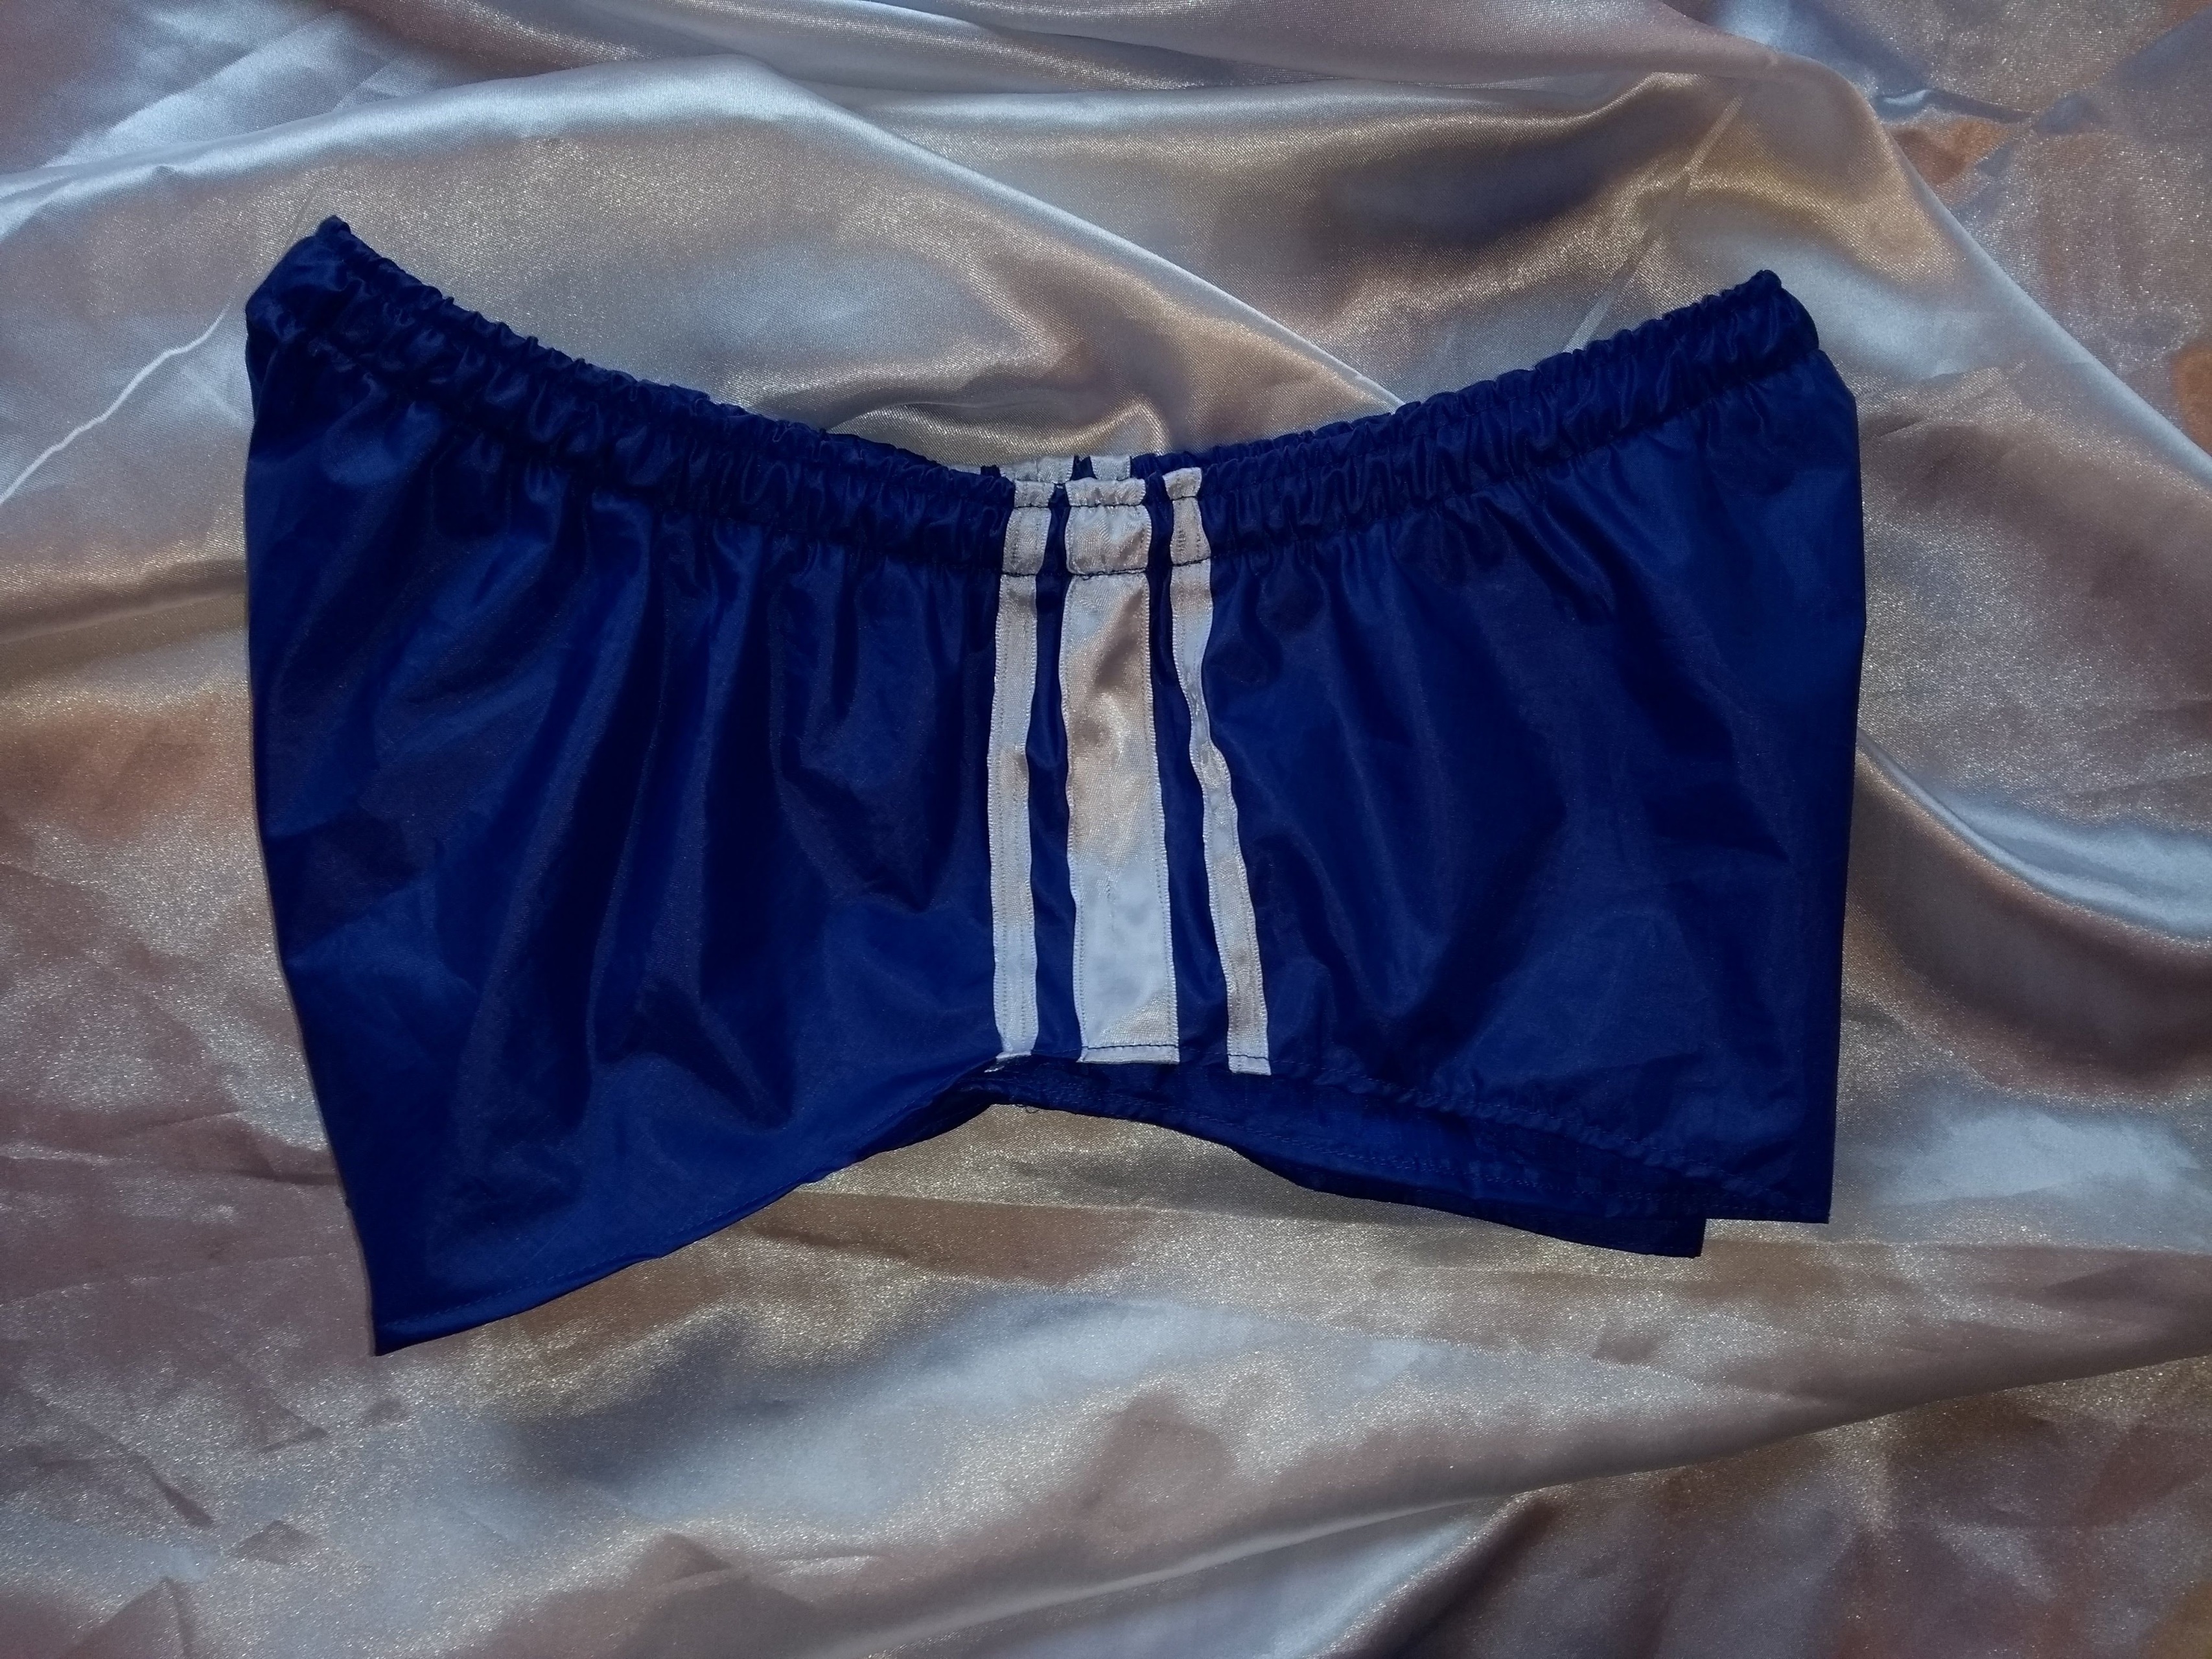 Hi-cut ripstop nylon footy shorts in royal blue with white stripes (M / L)